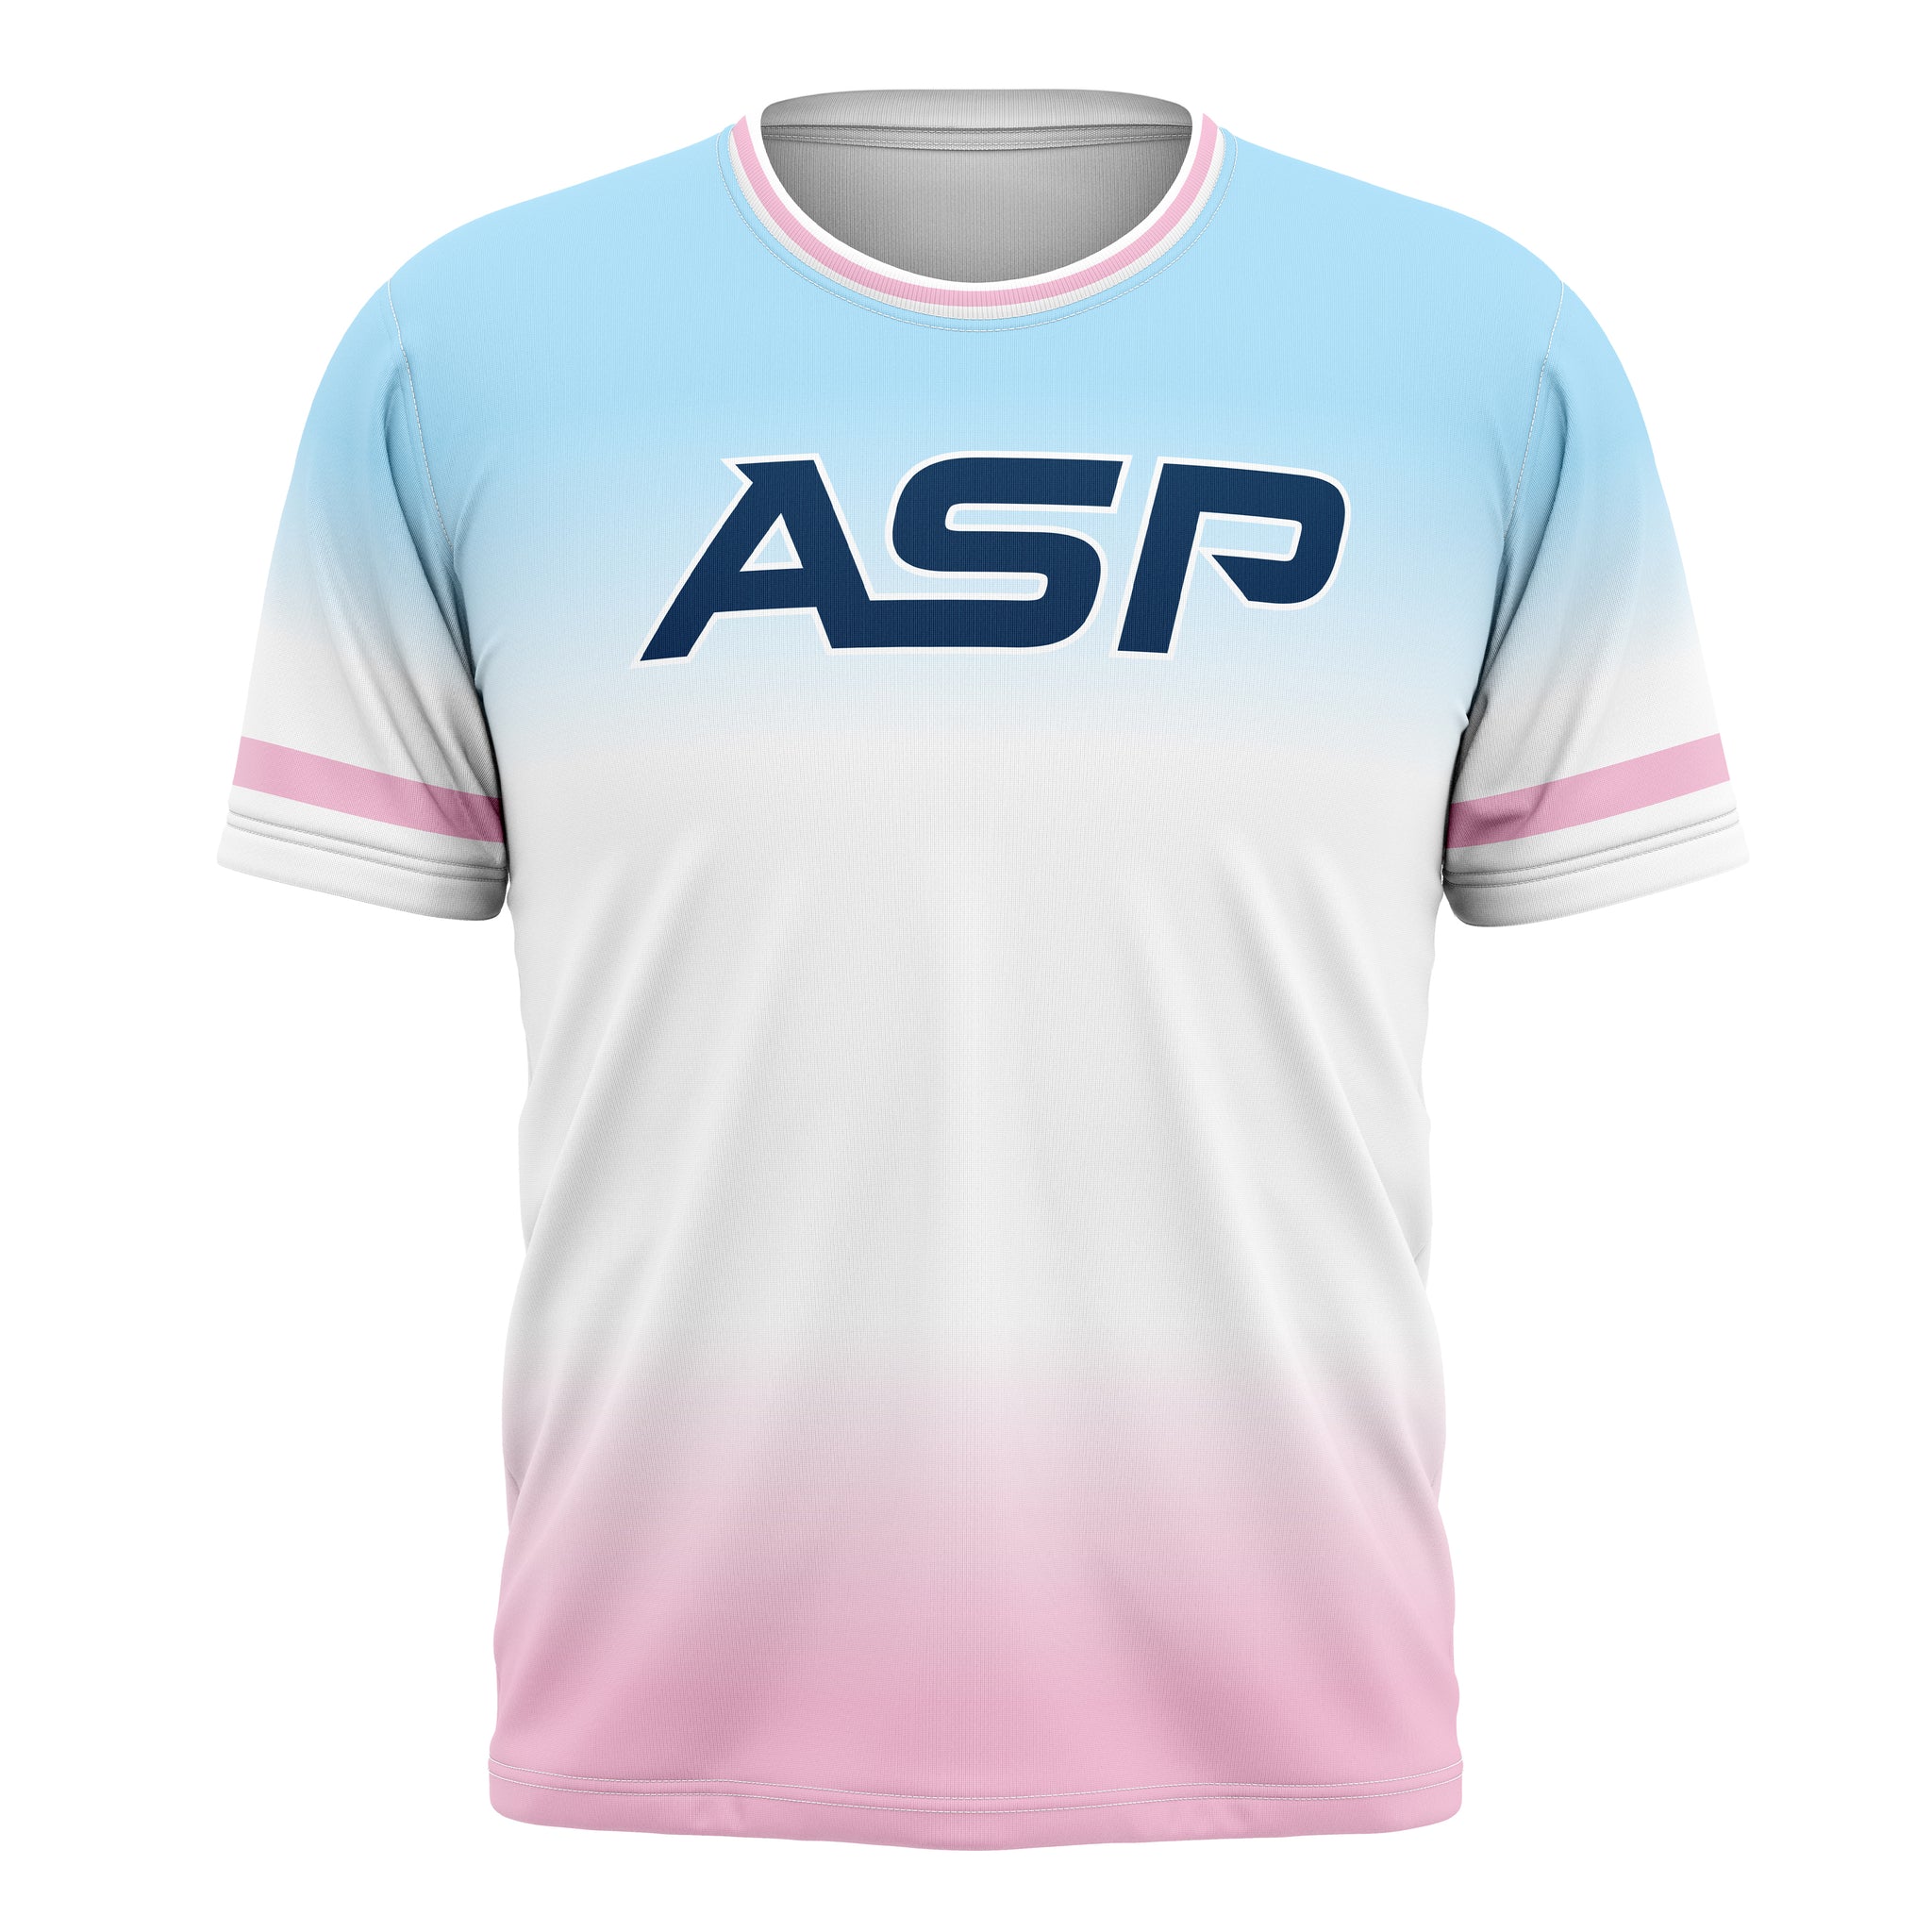 ASP Cotton Candy Series Short Sleeve